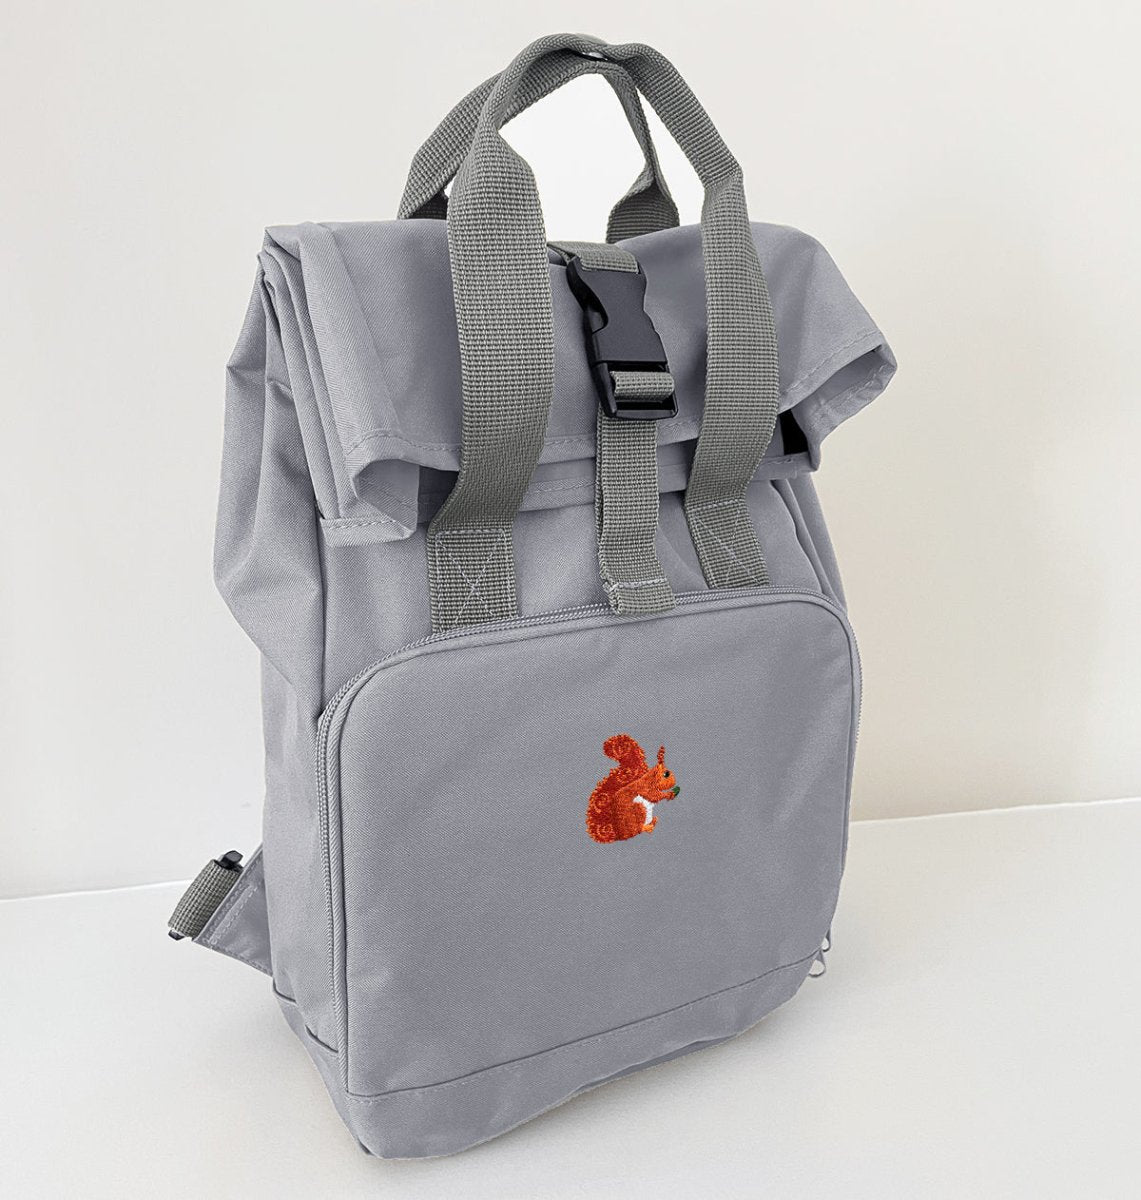 Red Squirrel Mini Roll-top Recycled Backpack - Blue Panda